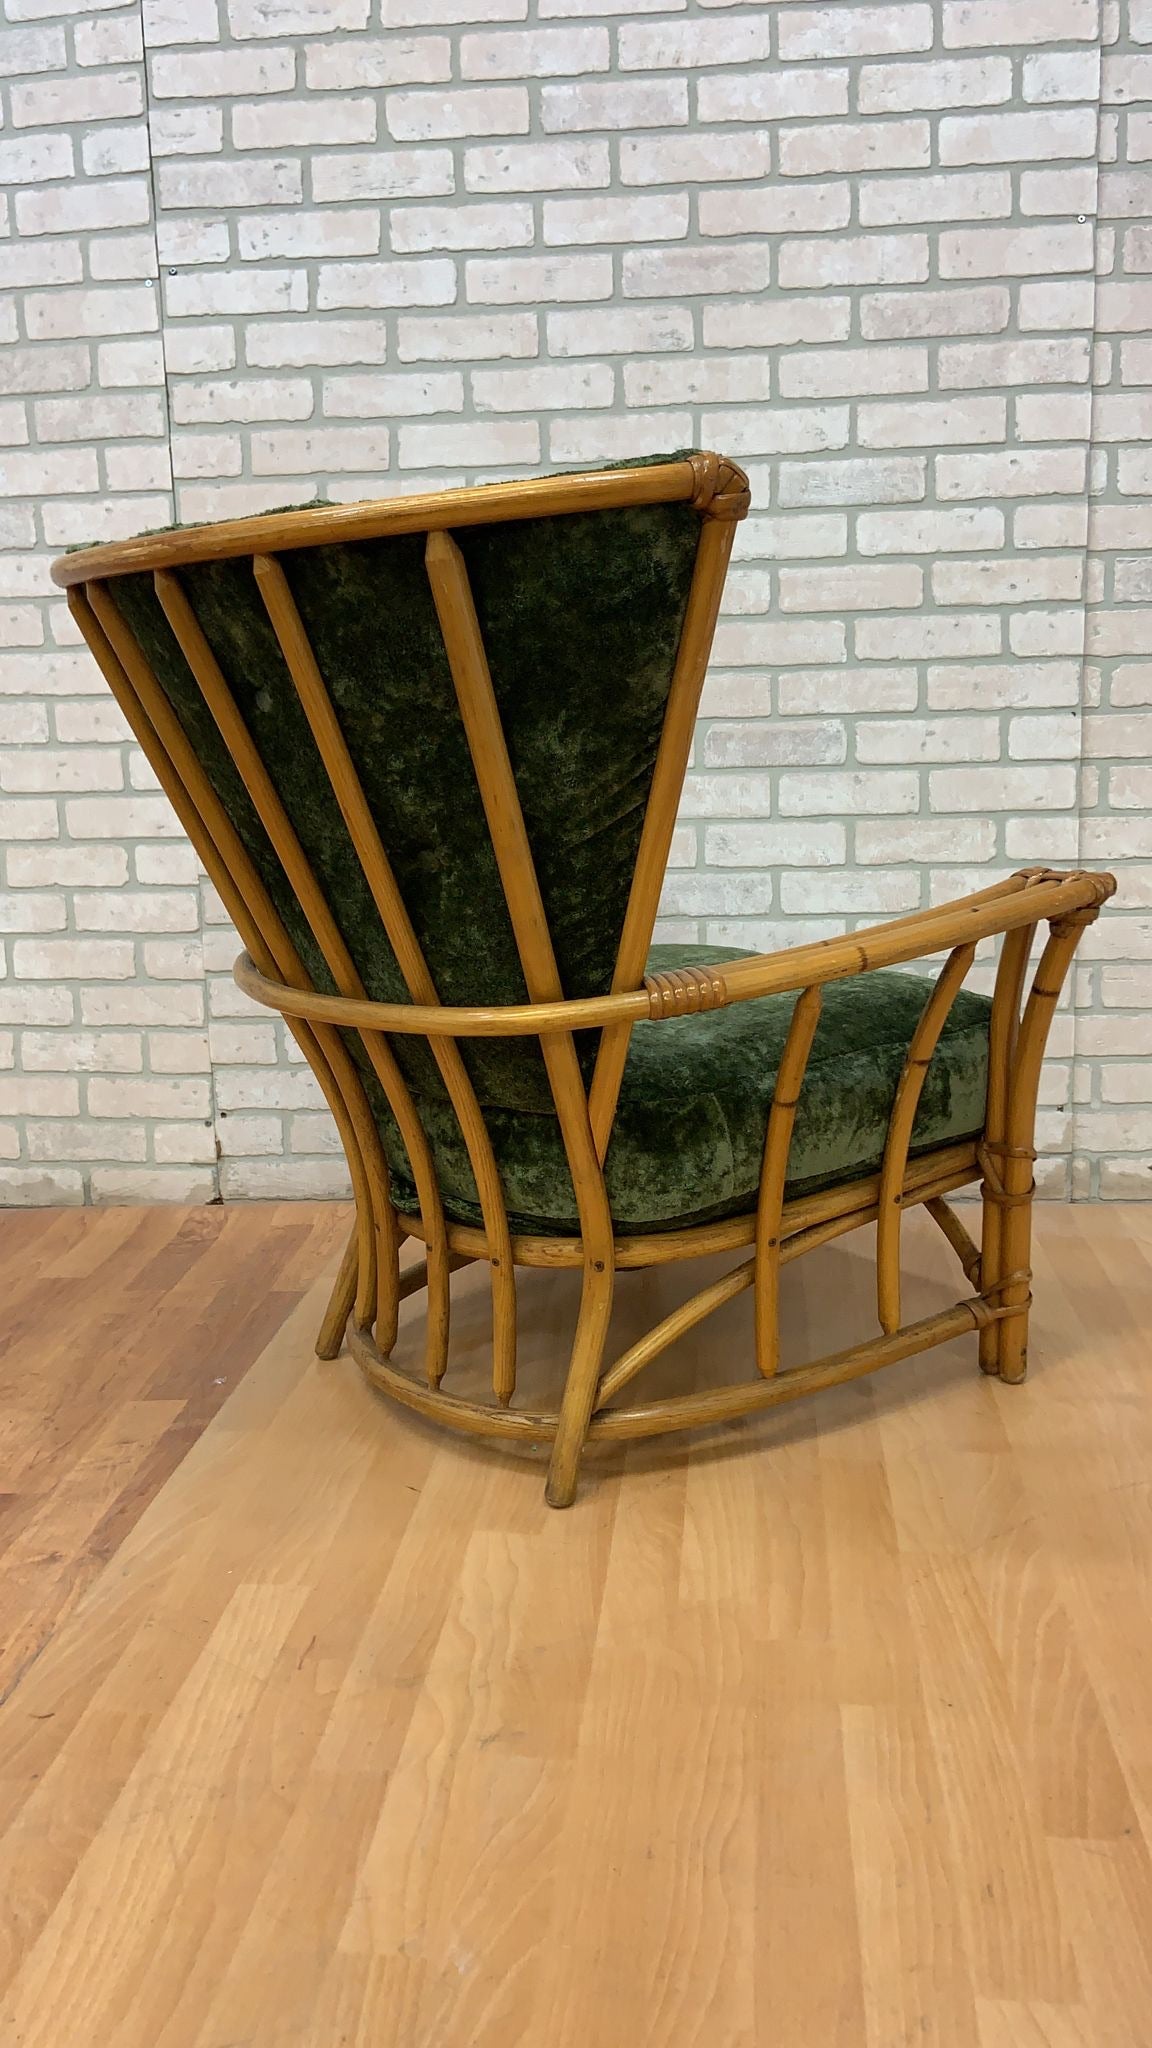 Vintage Mid Century Modern Rare Heywood Wakefield Ashcraft Rattan Lounge Chairs Newly Upholstered in a Deep Emerald Green Velvet - Set of 2